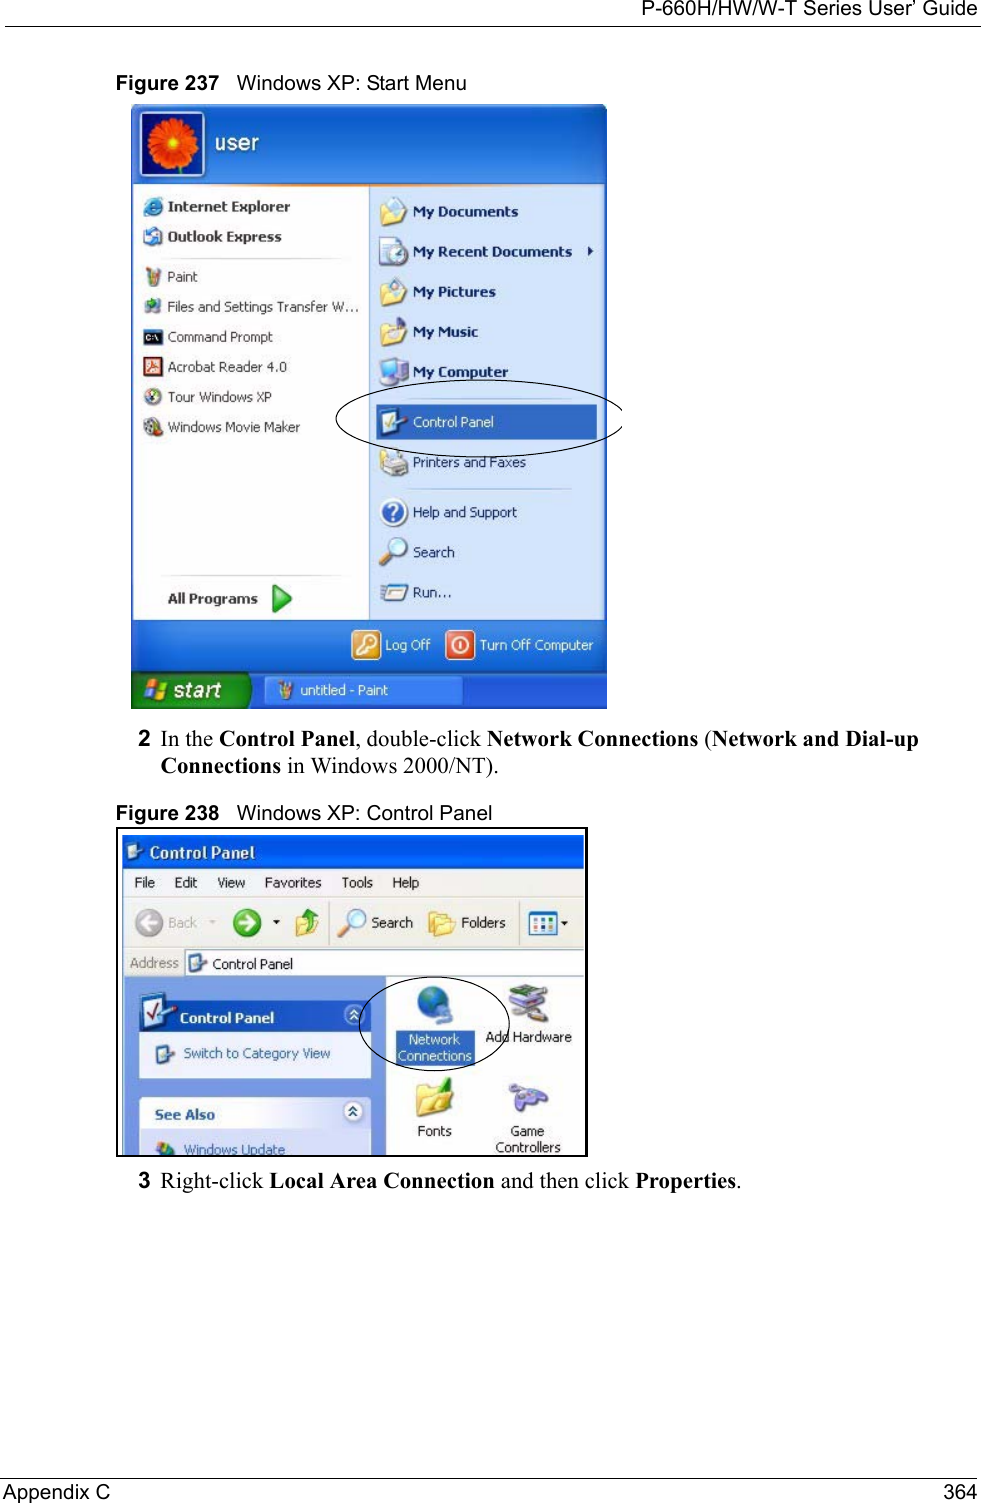 P-660H/HW/W-T Series User’ GuideAppendix C 364Figure 237   Windows XP: Start Menu2In the Control Panel, double-click Network Connections (Network and Dial-up Connections in Windows 2000/NT).Figure 238   Windows XP: Control Panel3Right-click Local Area Connection and then click Properties.